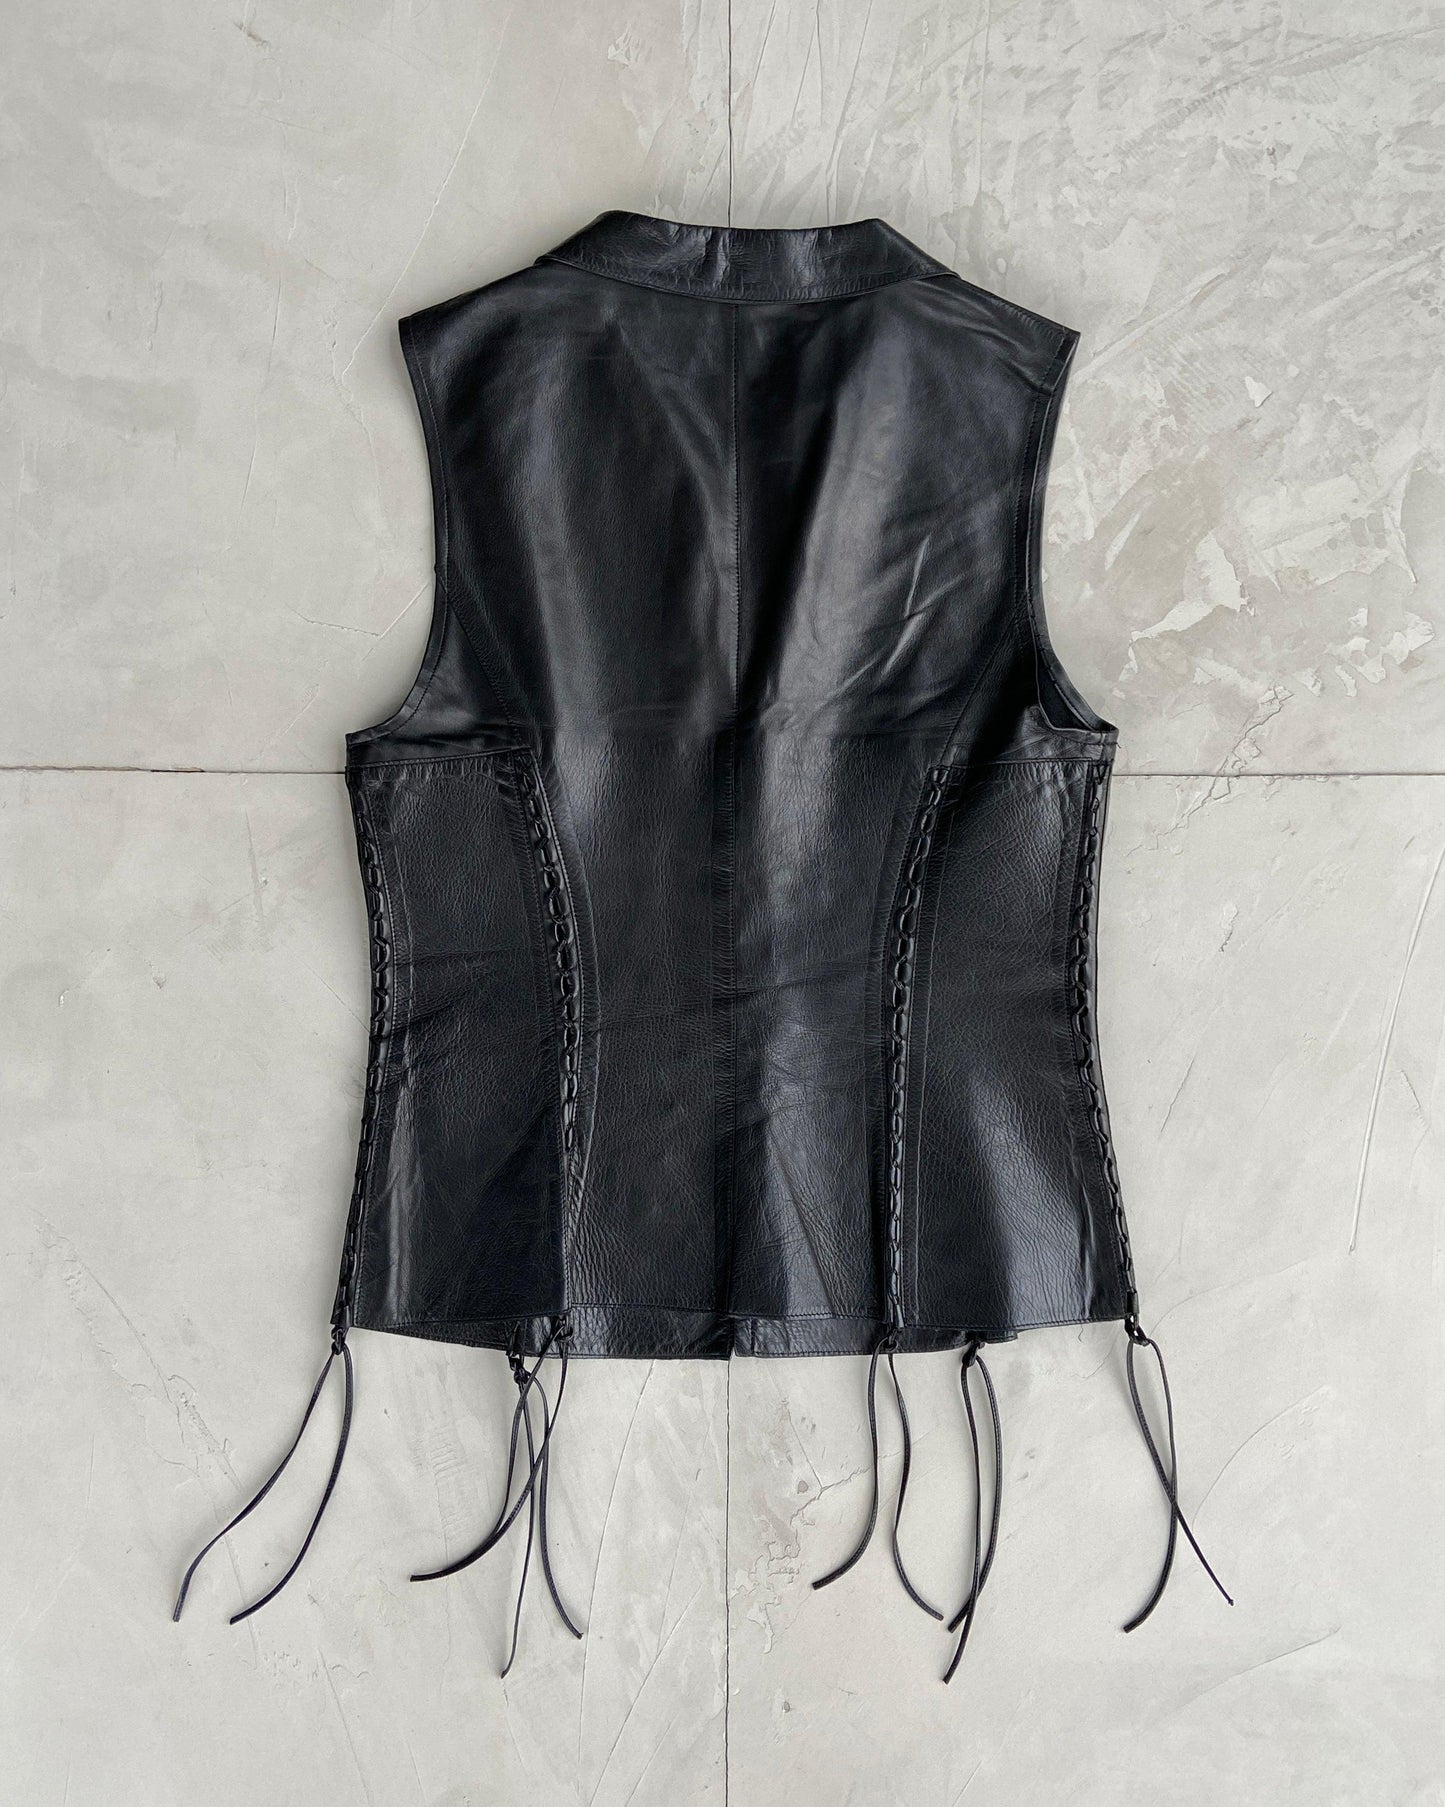 ROBERTO CAVALLI 2000'S LEATHER LACE UP WAIST COAT - L - Known Source